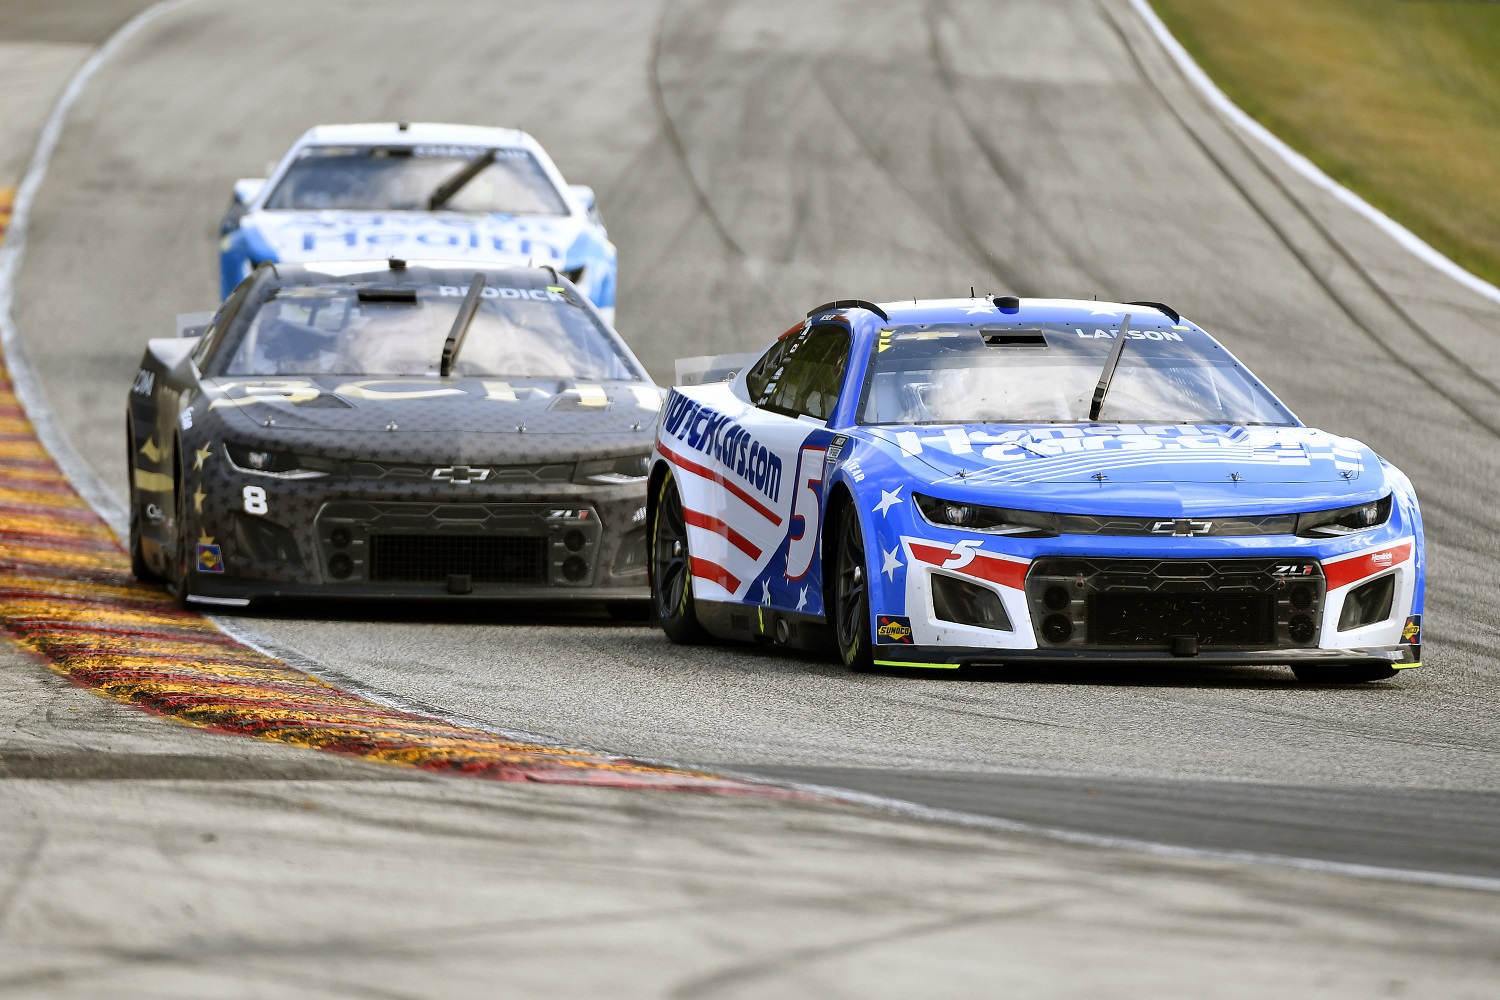 Trading Road America for Chicago Would Be a NASCAR Mistake